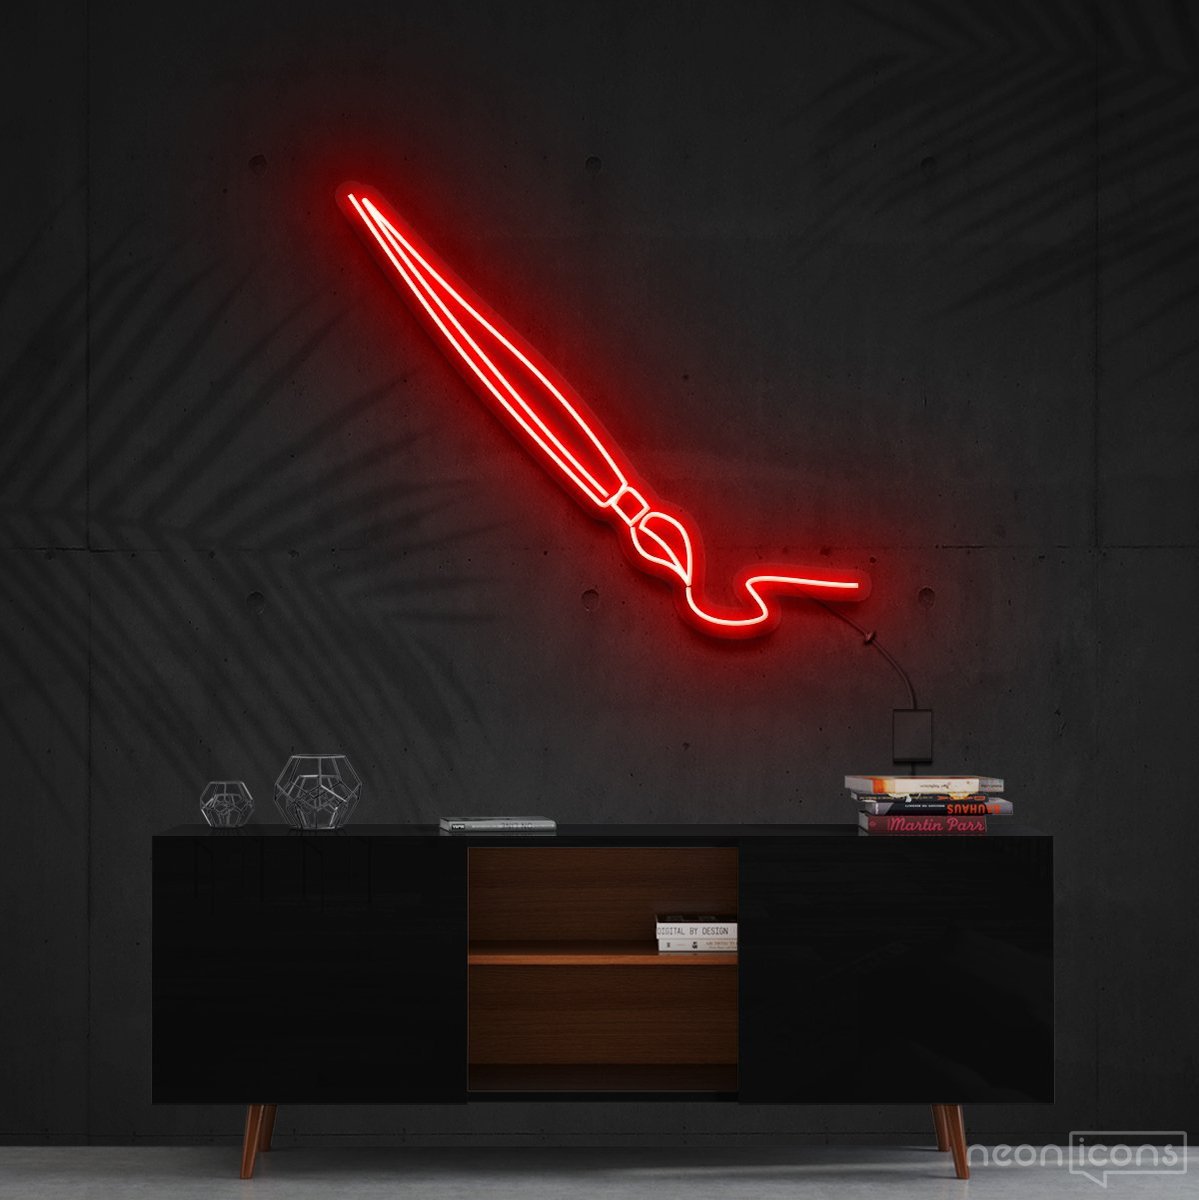 "Penmanship" Neon Sign 60cm (2ft) / Red / Cut to Shape by Neon Icons